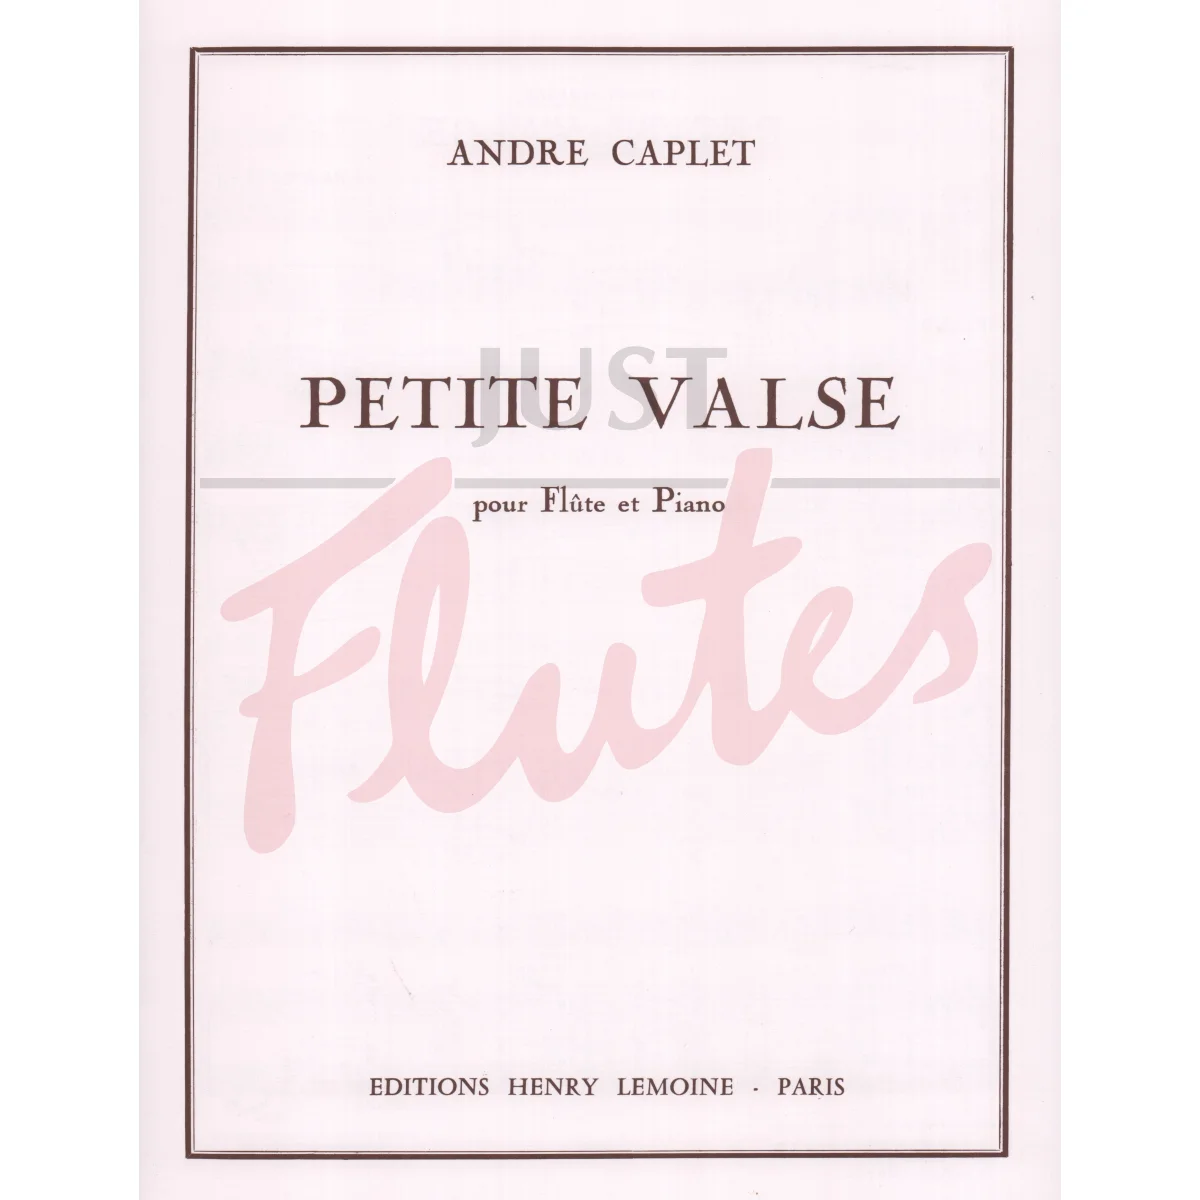 Petite Valse for Flute and Piano